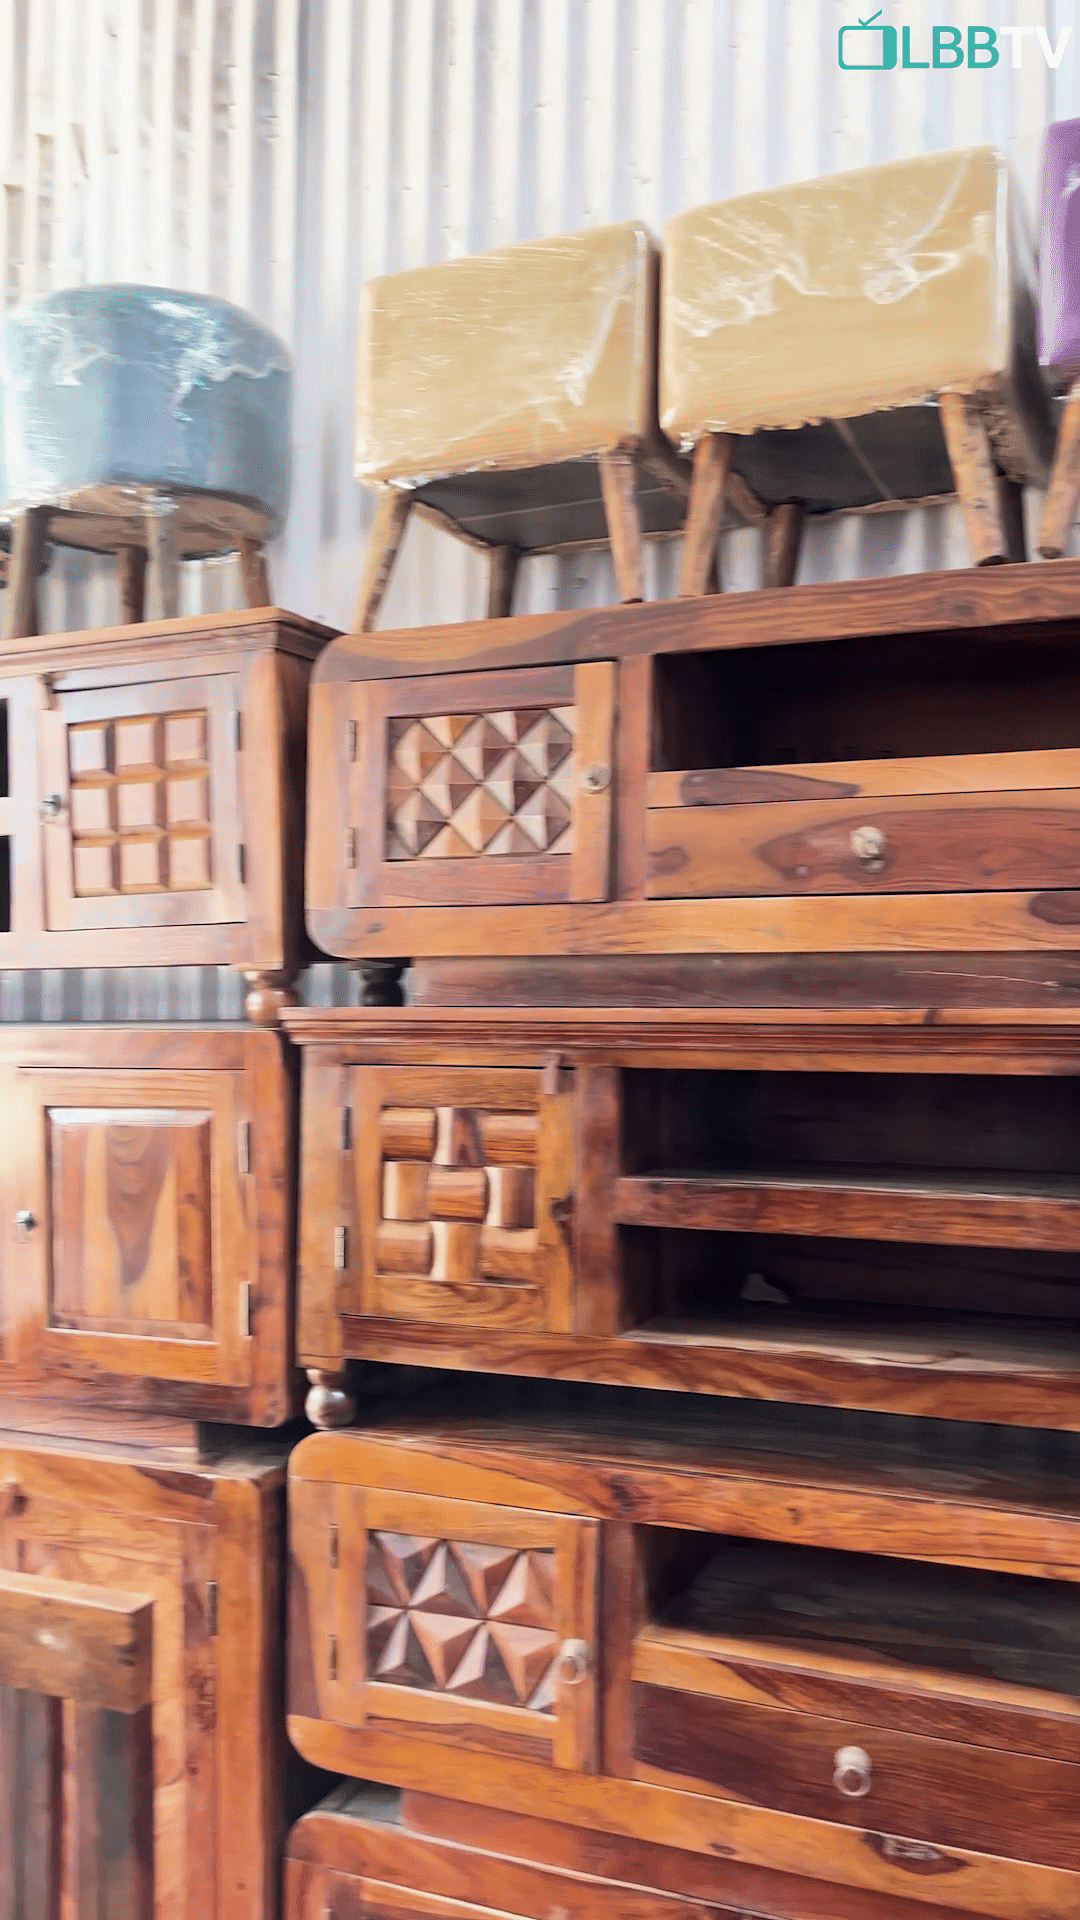 Brown,Wood,Drawer,Wood stain,Hardwood,Varnish,Pattern,Font,Chest of drawers,Plywood